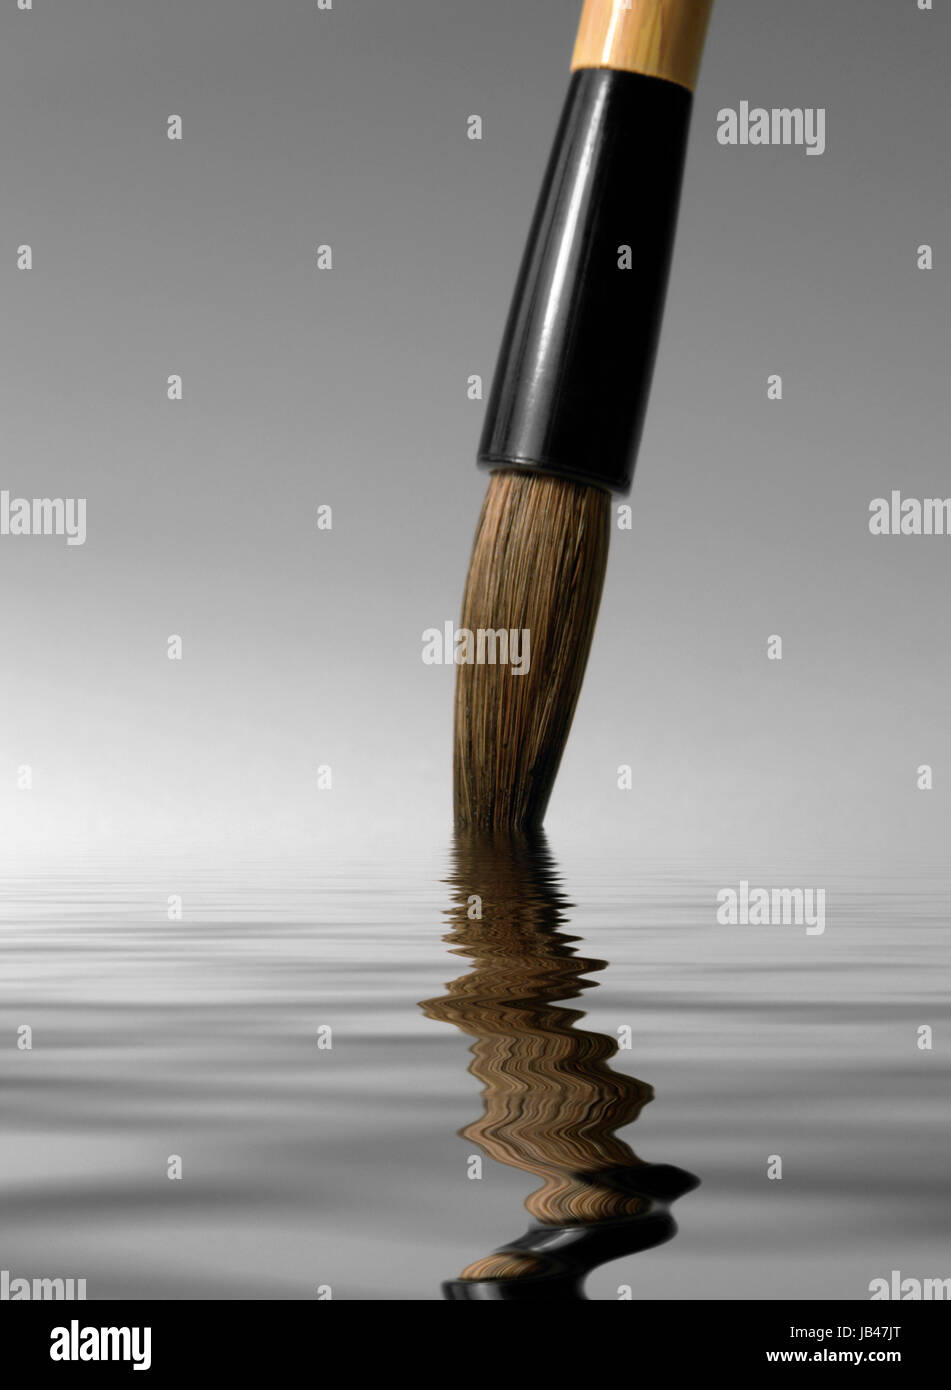 detail of a chinese brush tip dipped in a reflective water surface in grey back Stock Photo